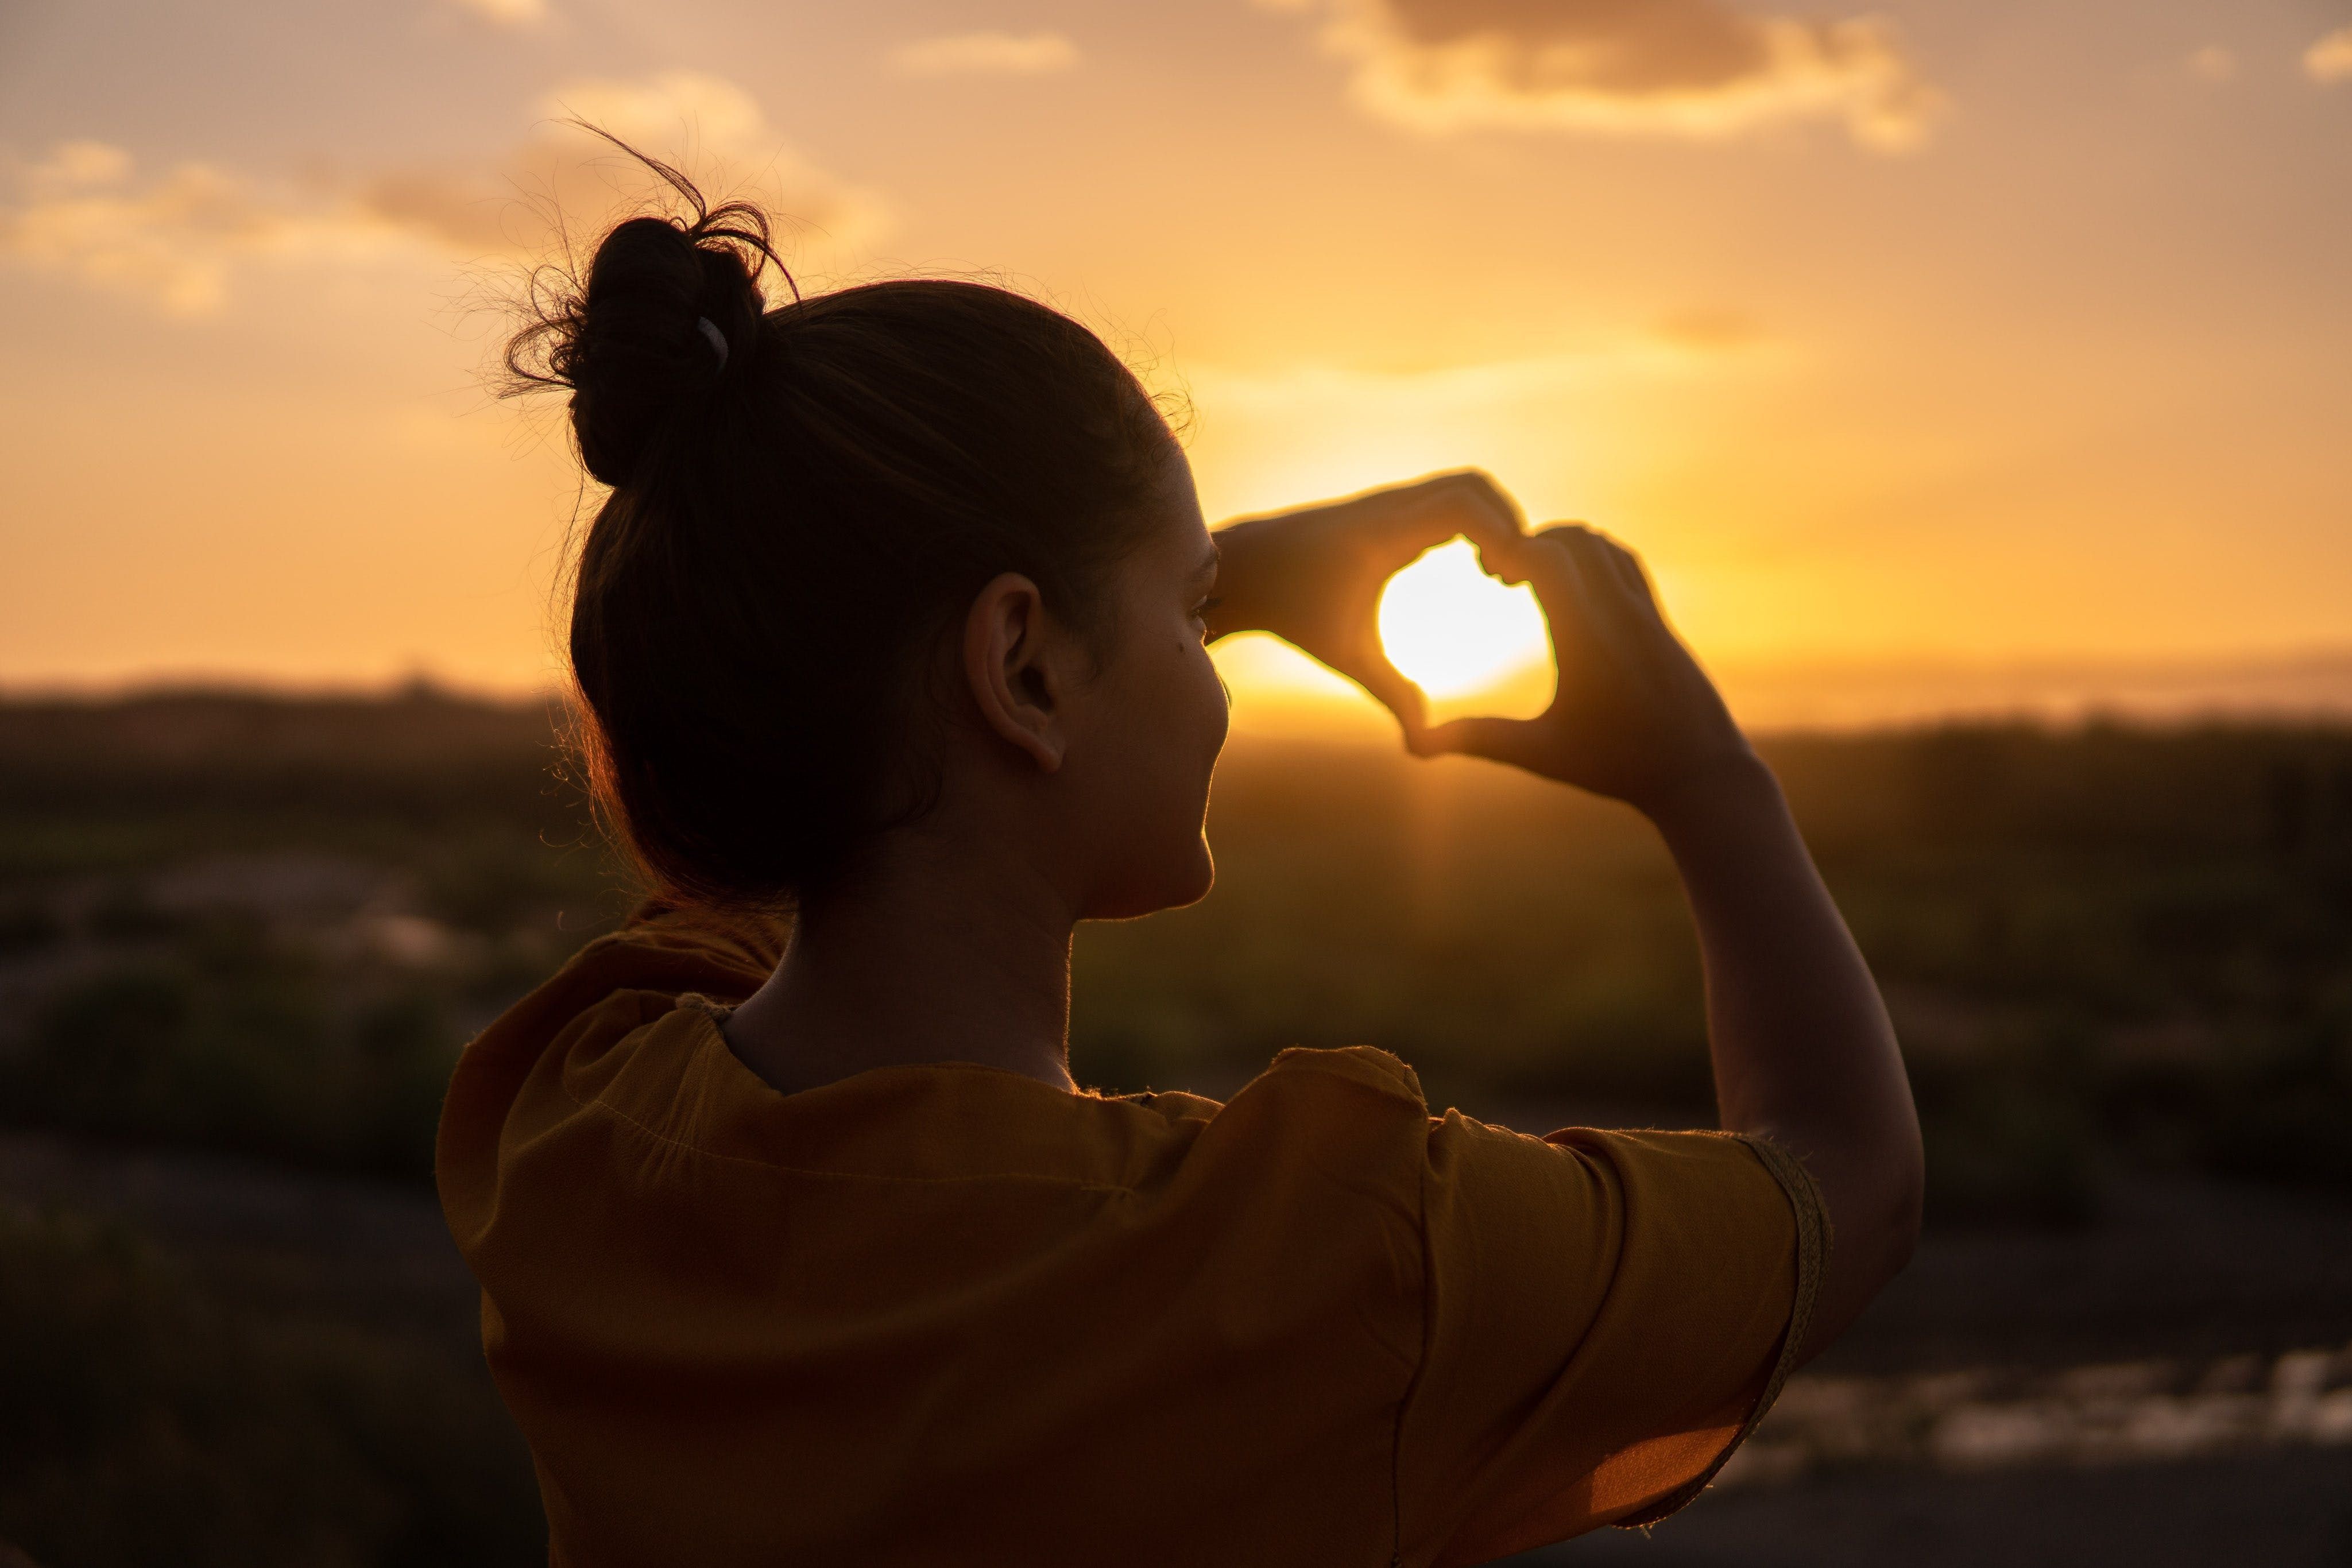 woman in sunset making heart shape with hands